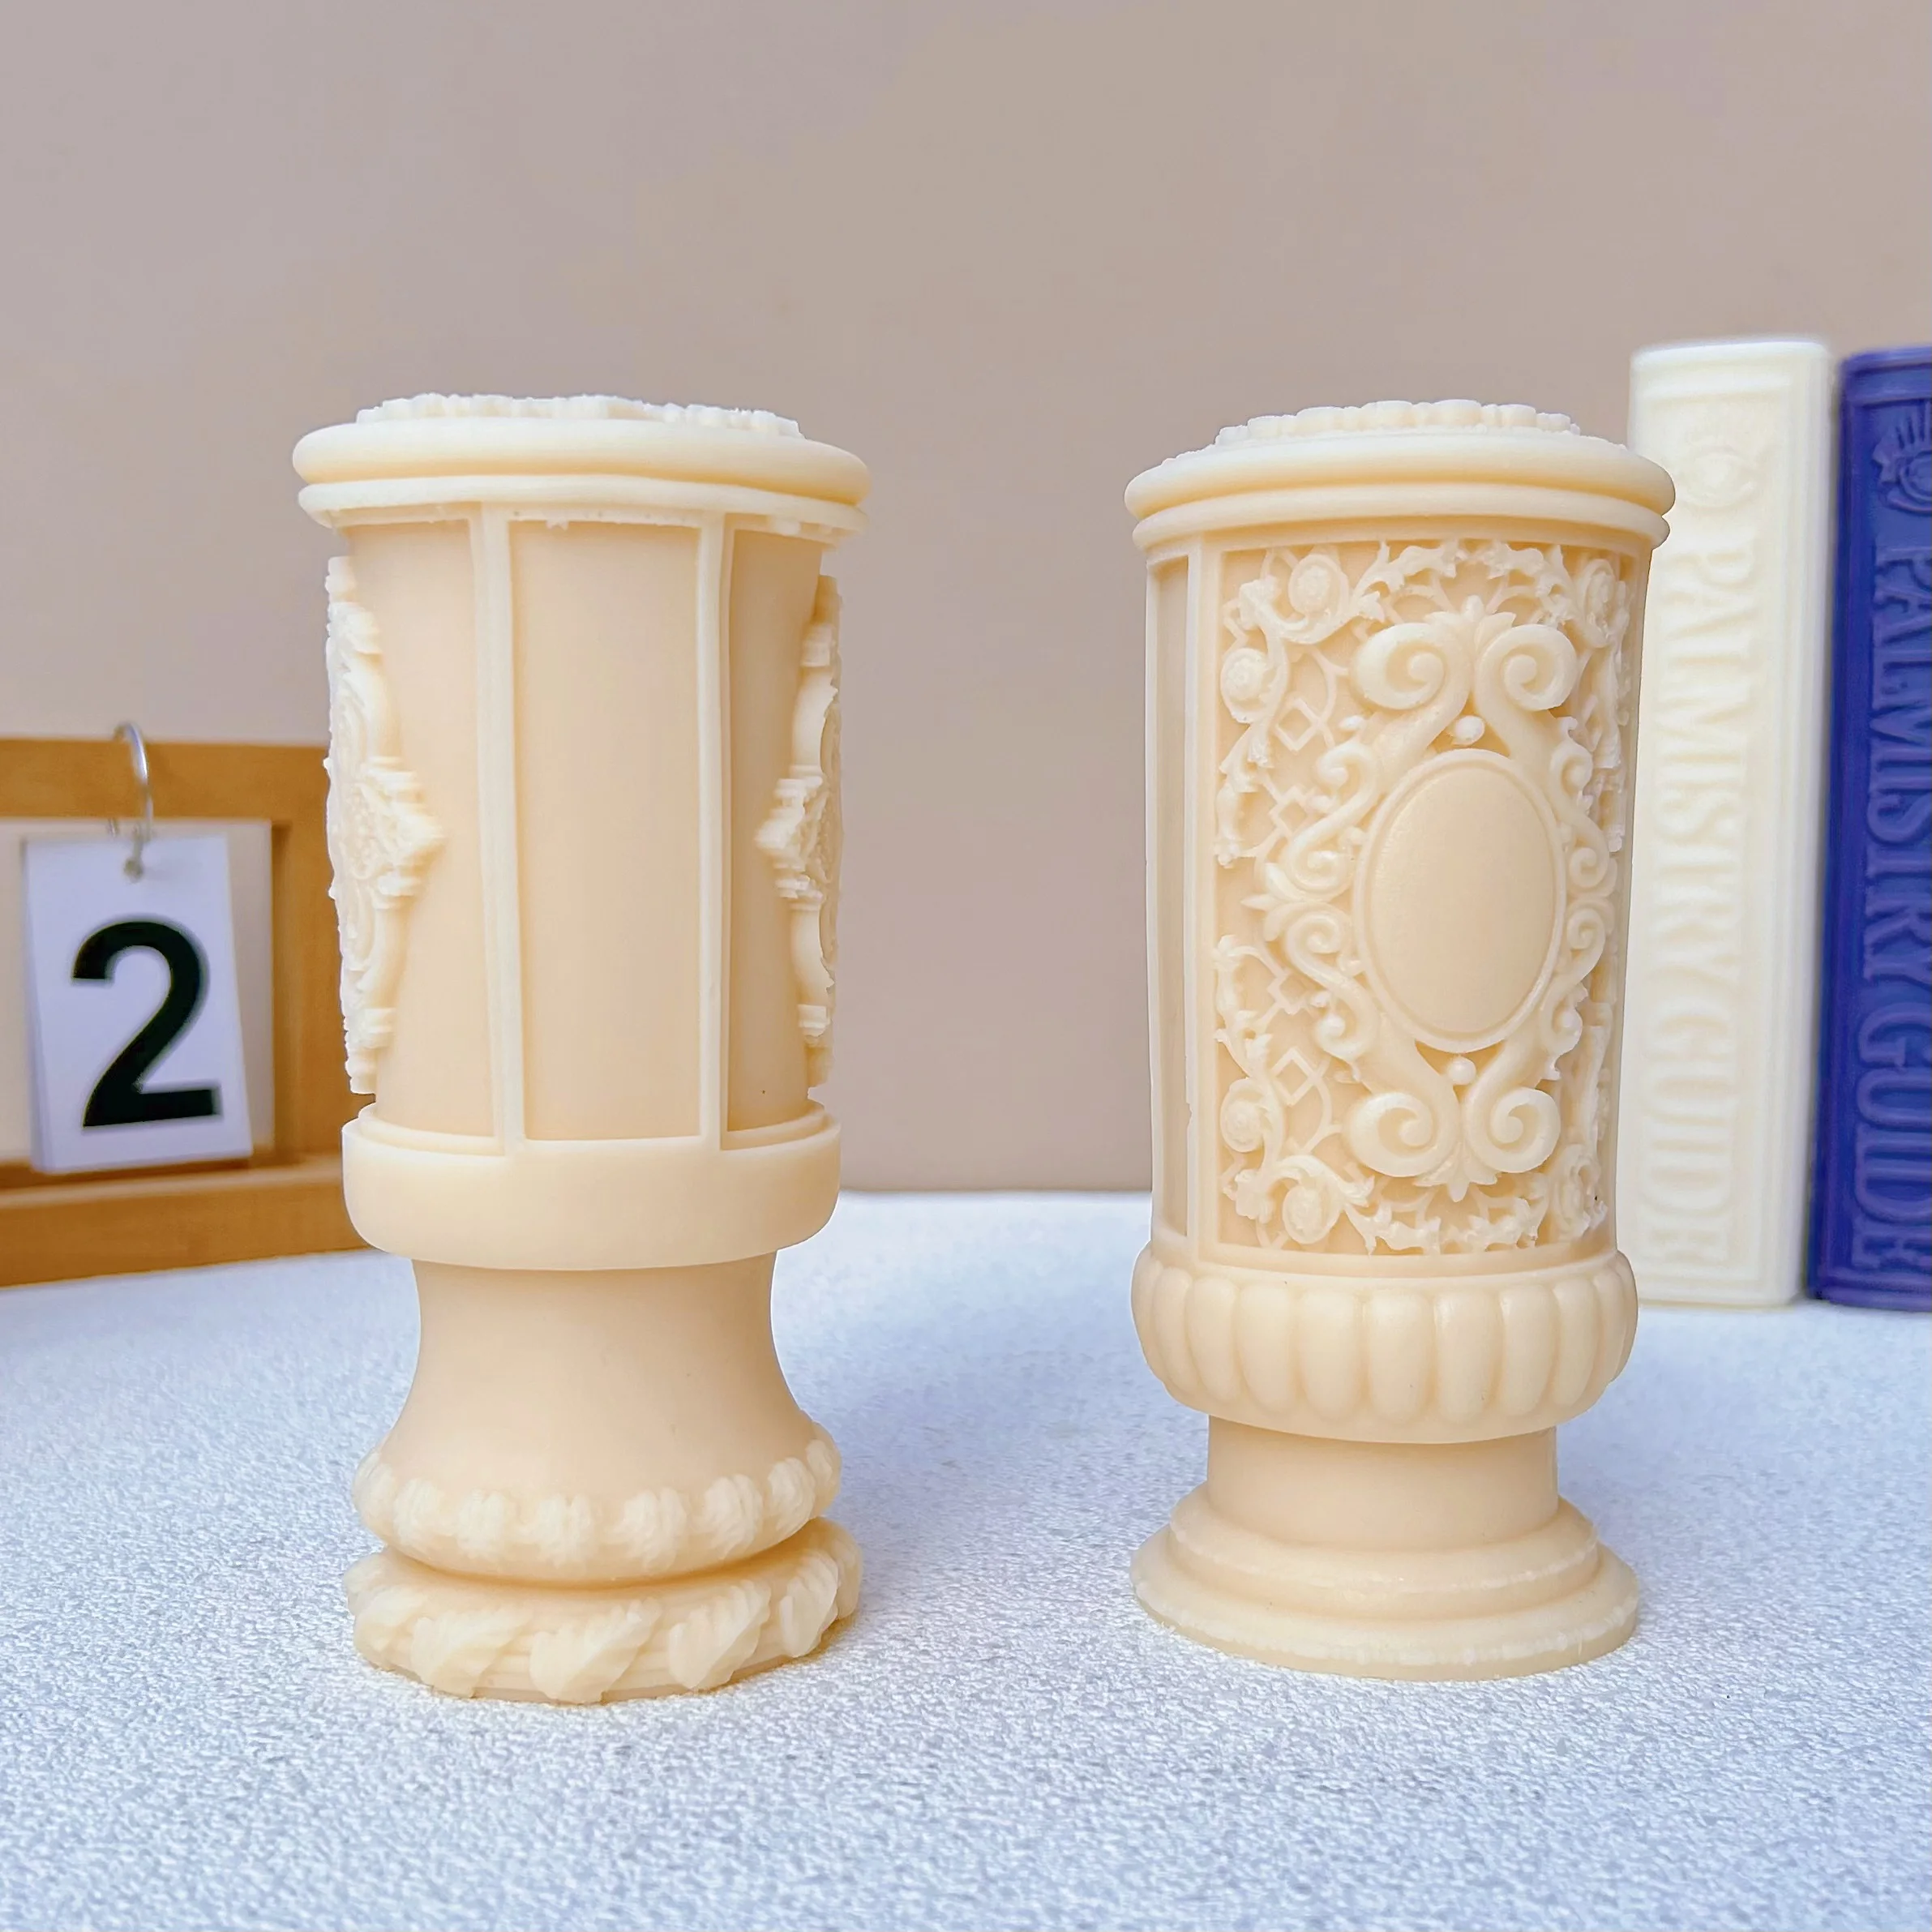 

New Roman Cylindrical Silicone Candle Mold With Pillar Stripes DIY Candle Holder Production Design Handmade Candle Shape